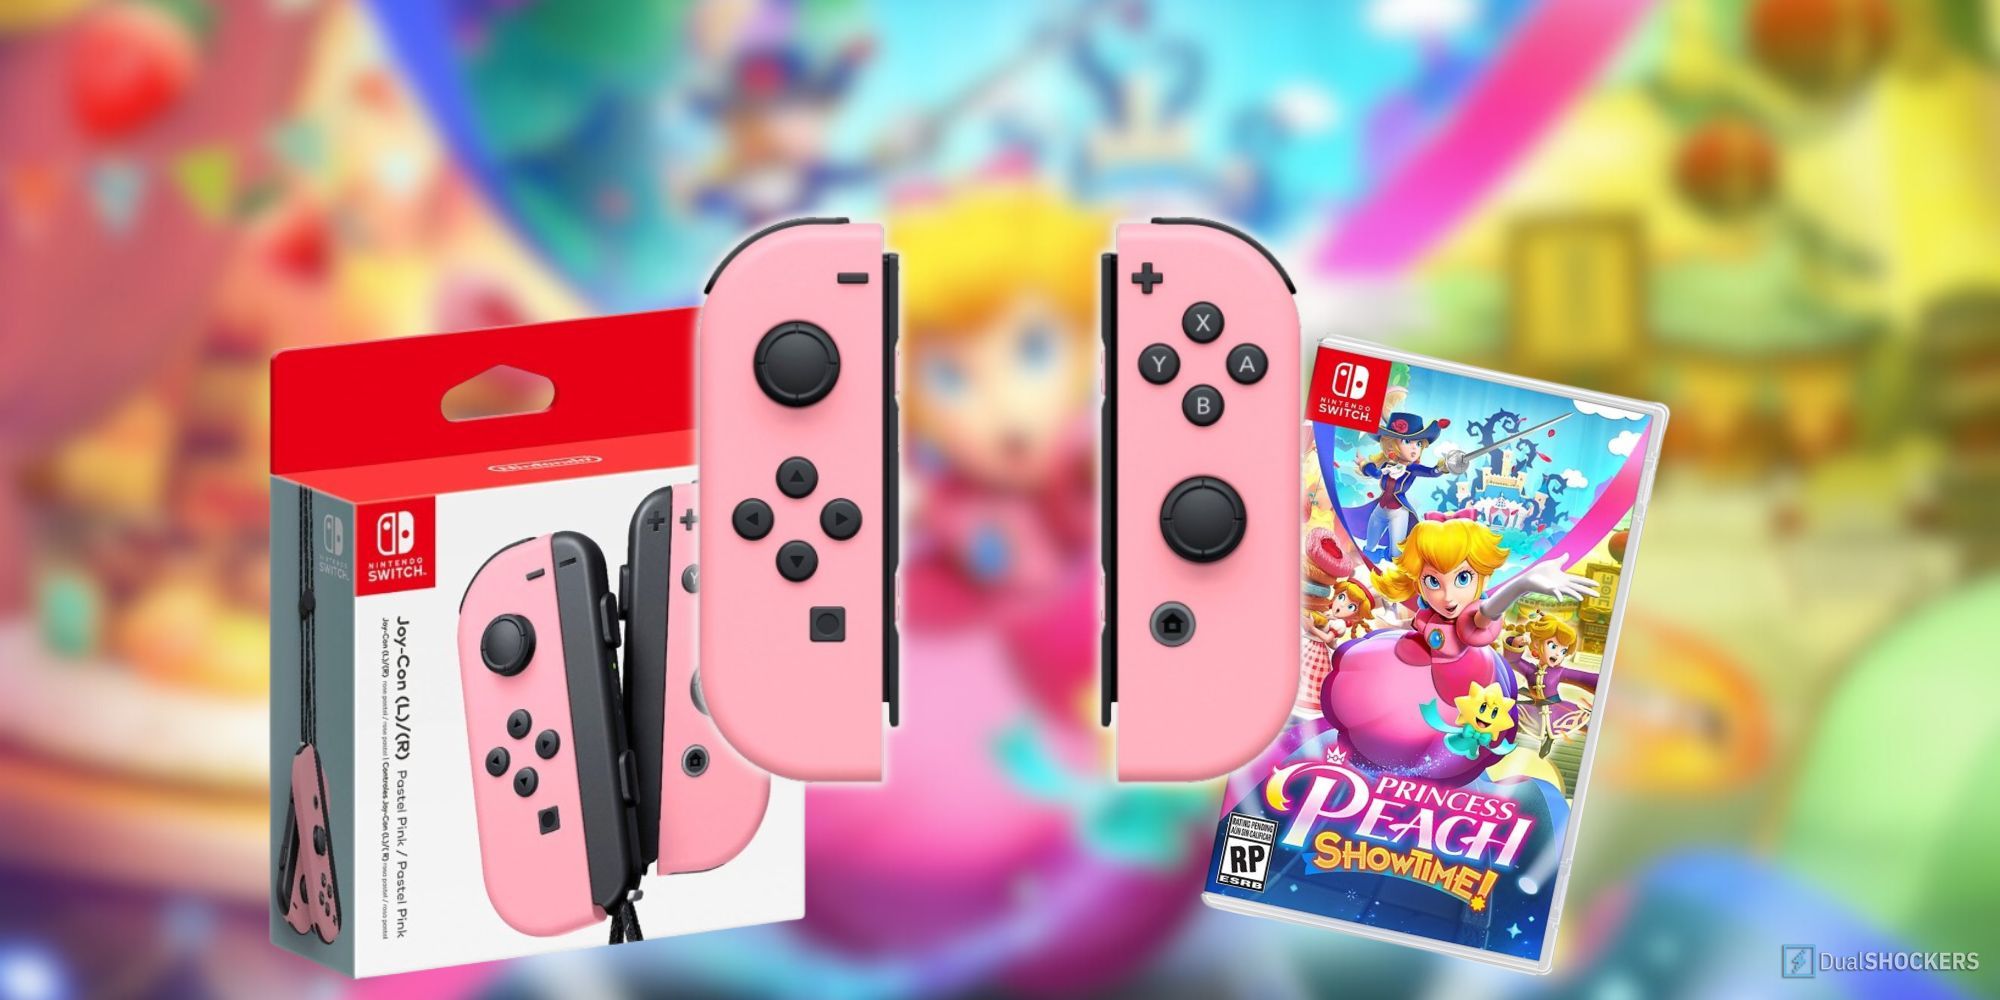 How to pre-order new Princess Peach pink Joy-Cons in the UK